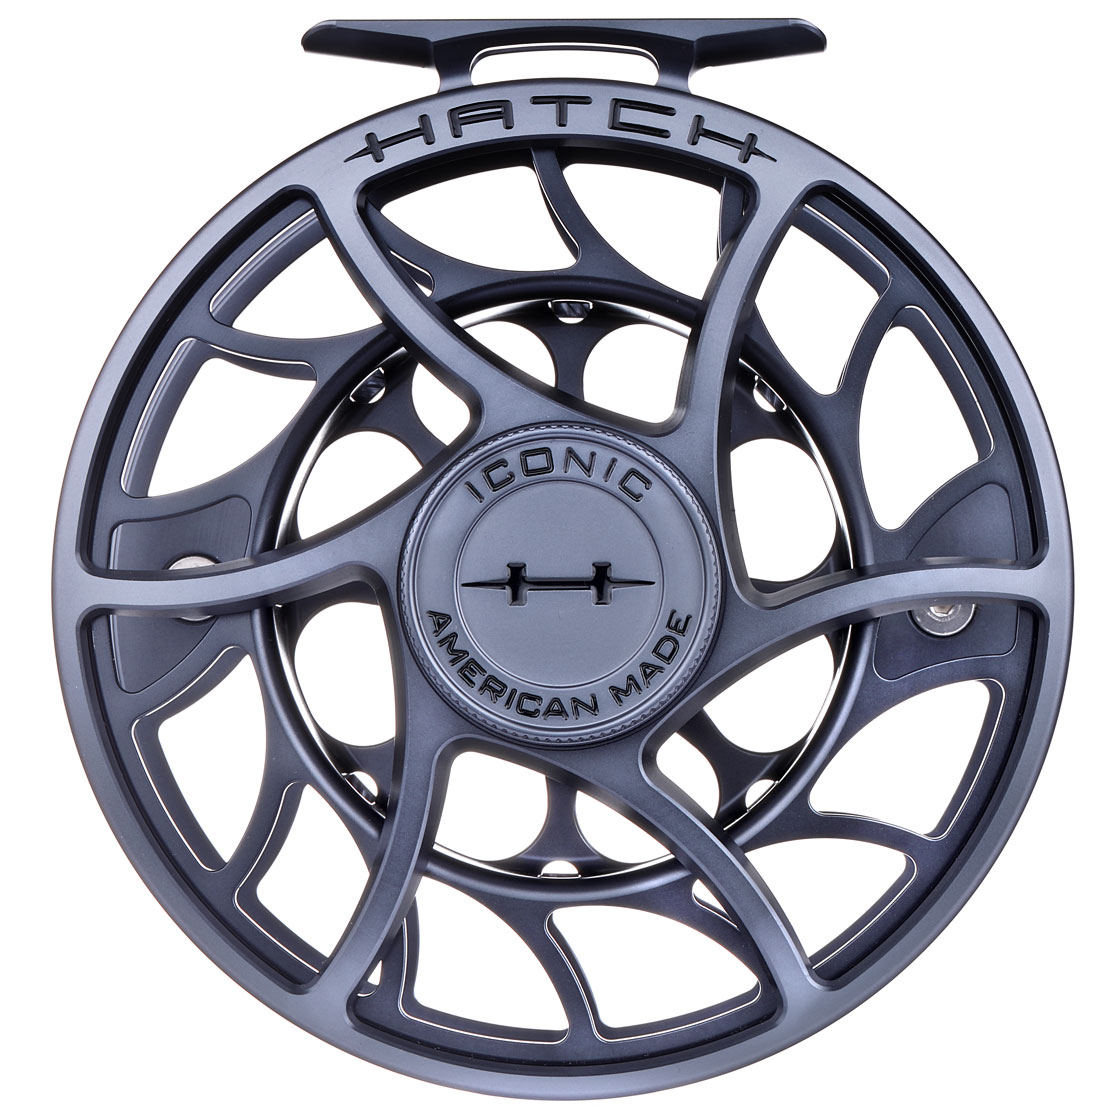 https://www.adh-fishing.com/media/image/e4/a3/cf/P-23101_Hatch-Iconic-Fly-Reel-Fliegenrolle-Large-Arbor-gray_black_front.jpg